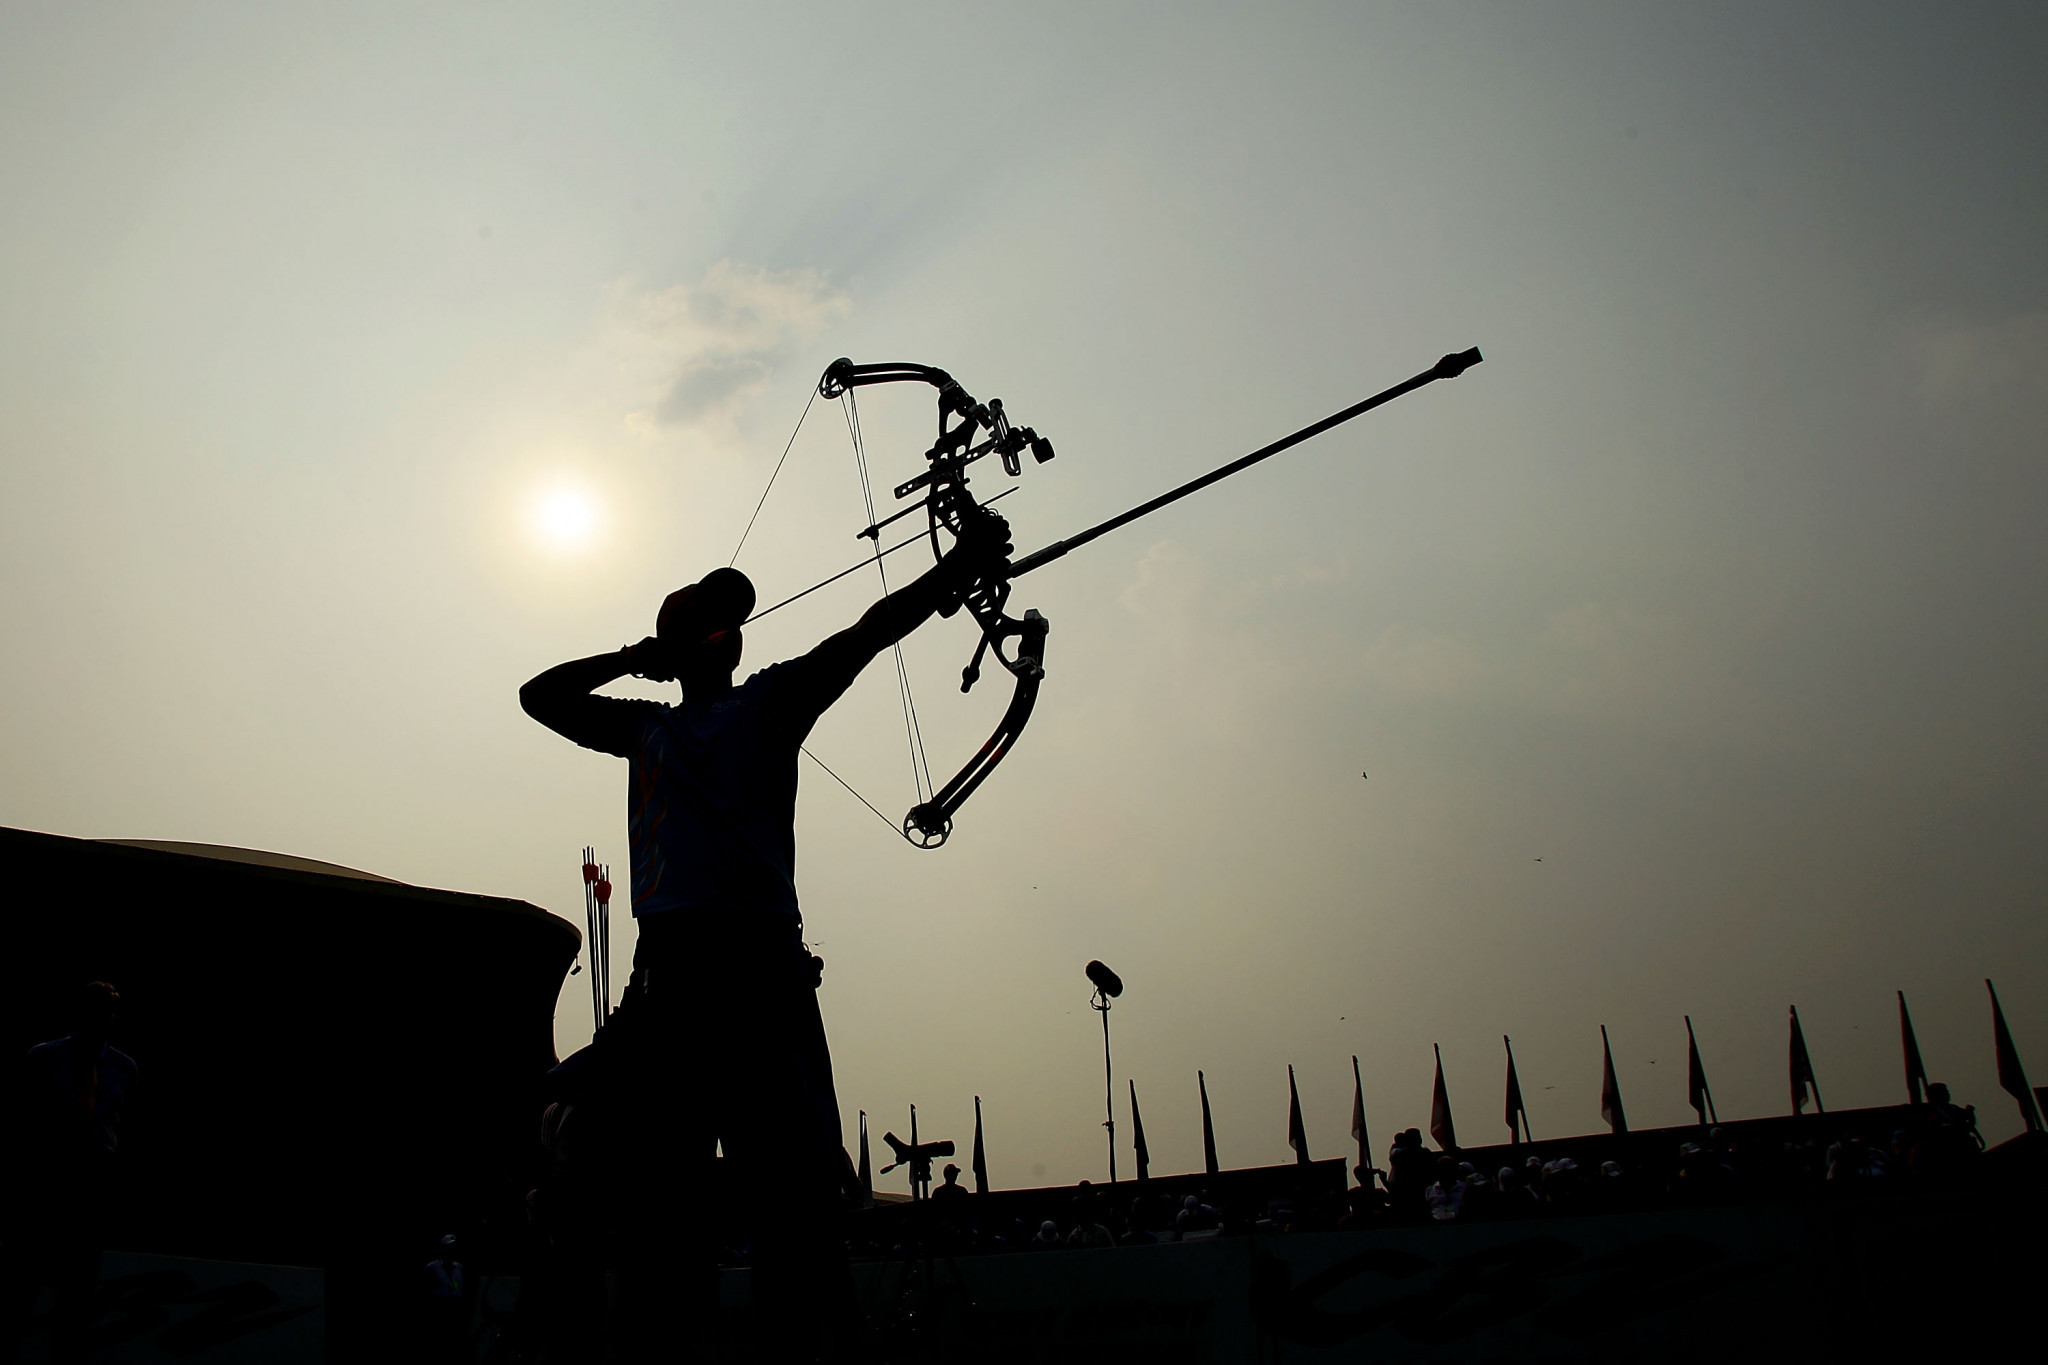 The World Archery Youth Championships ended today with recurve finals ©Getty Images